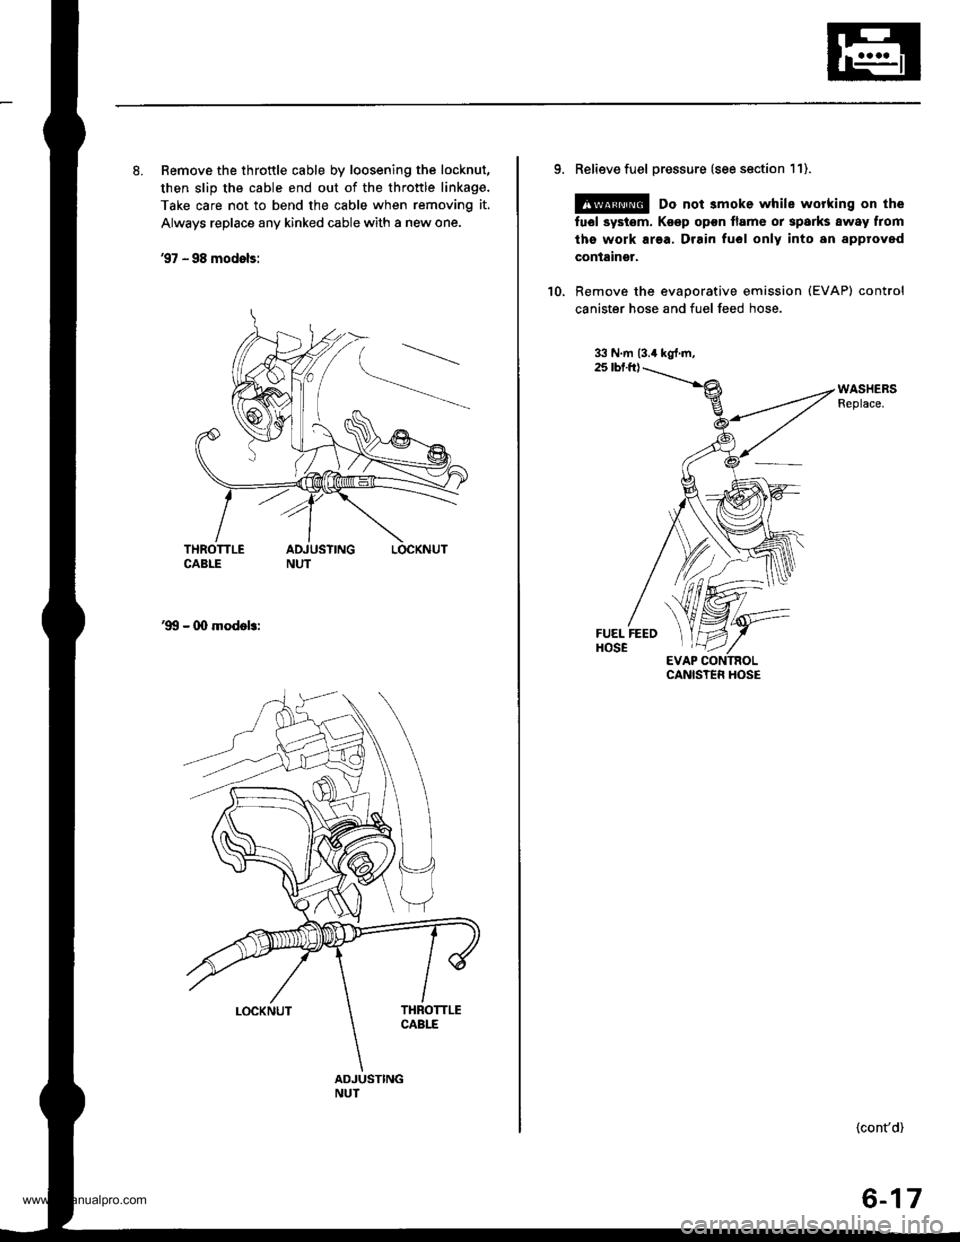 HONDA CR-V 1998 RD1-RD3 / 1.G Workshop Manual 
8. Remove the throttle cable by loosening the locknut,
then slip the cable end out of the throttle linkage.
Take care not to bend the cable when removing it.
Always replace any kinked cable with a ne